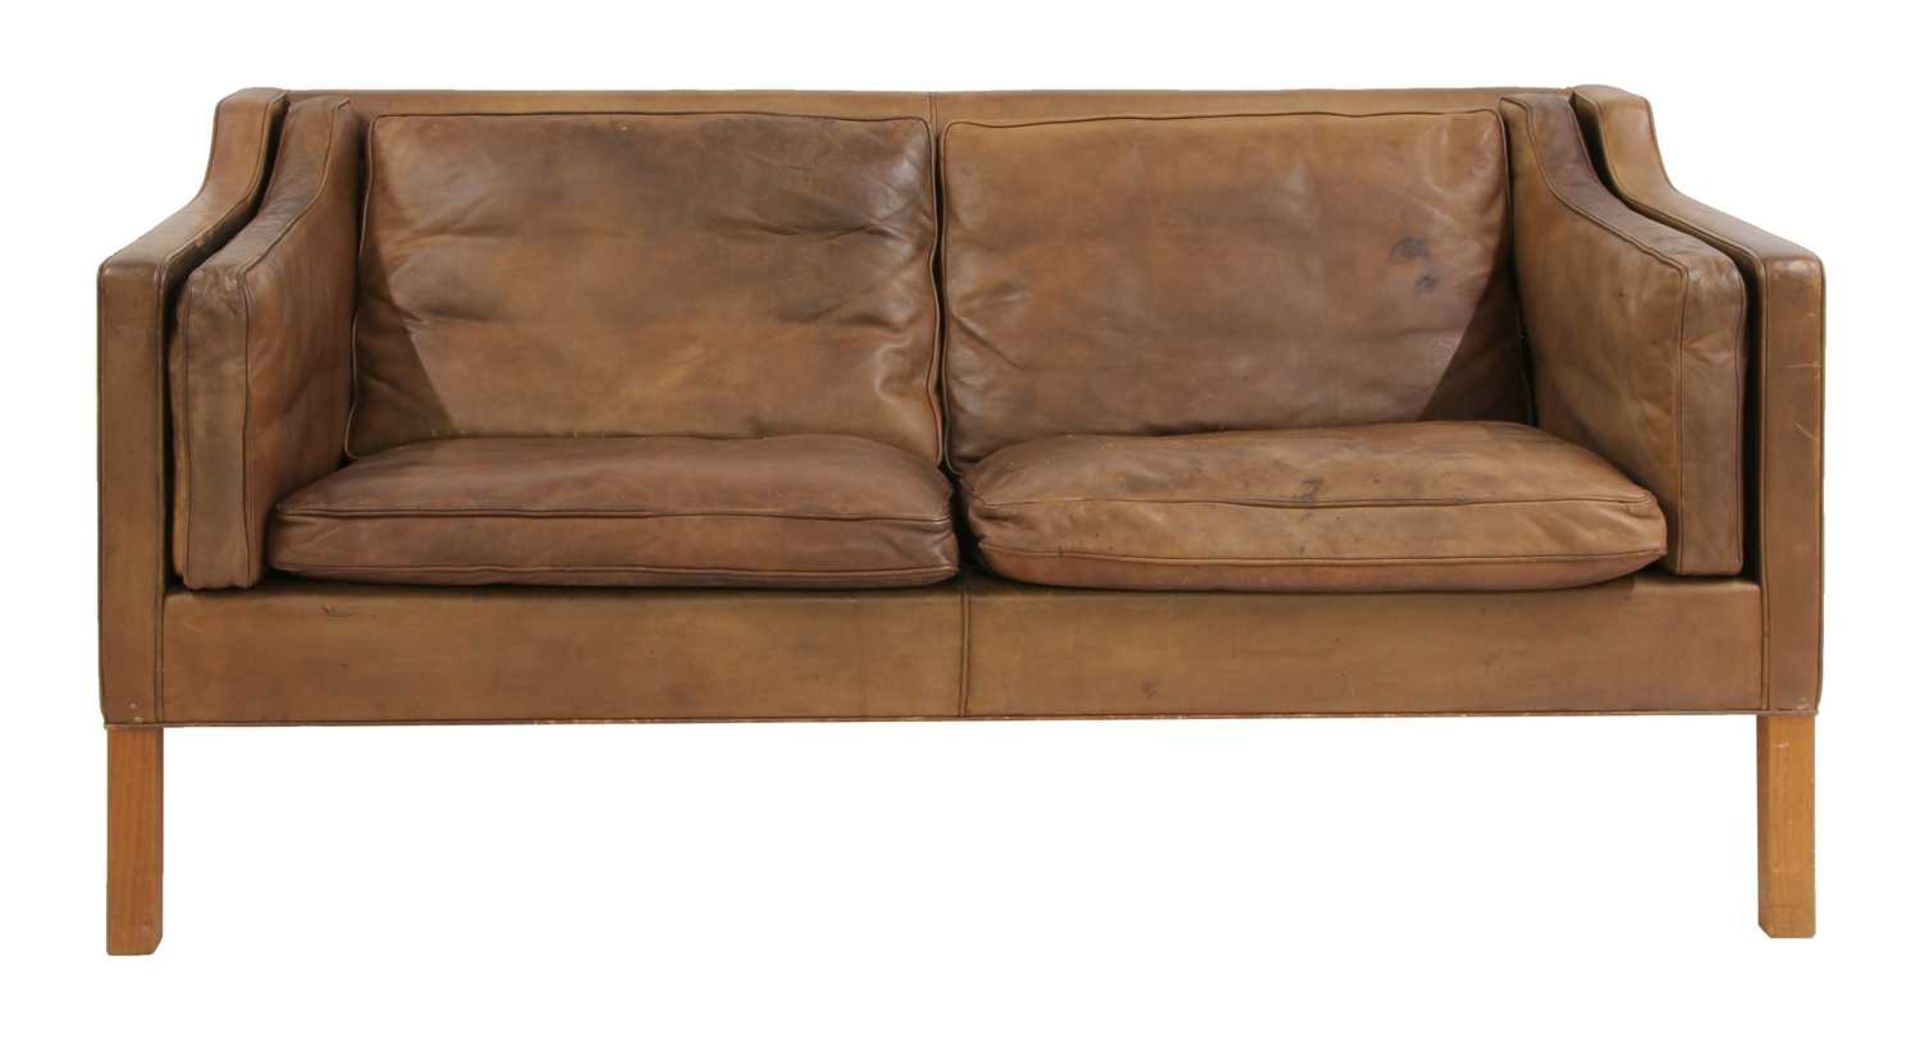 A brown leather 2212 settee, - Image 2 of 2